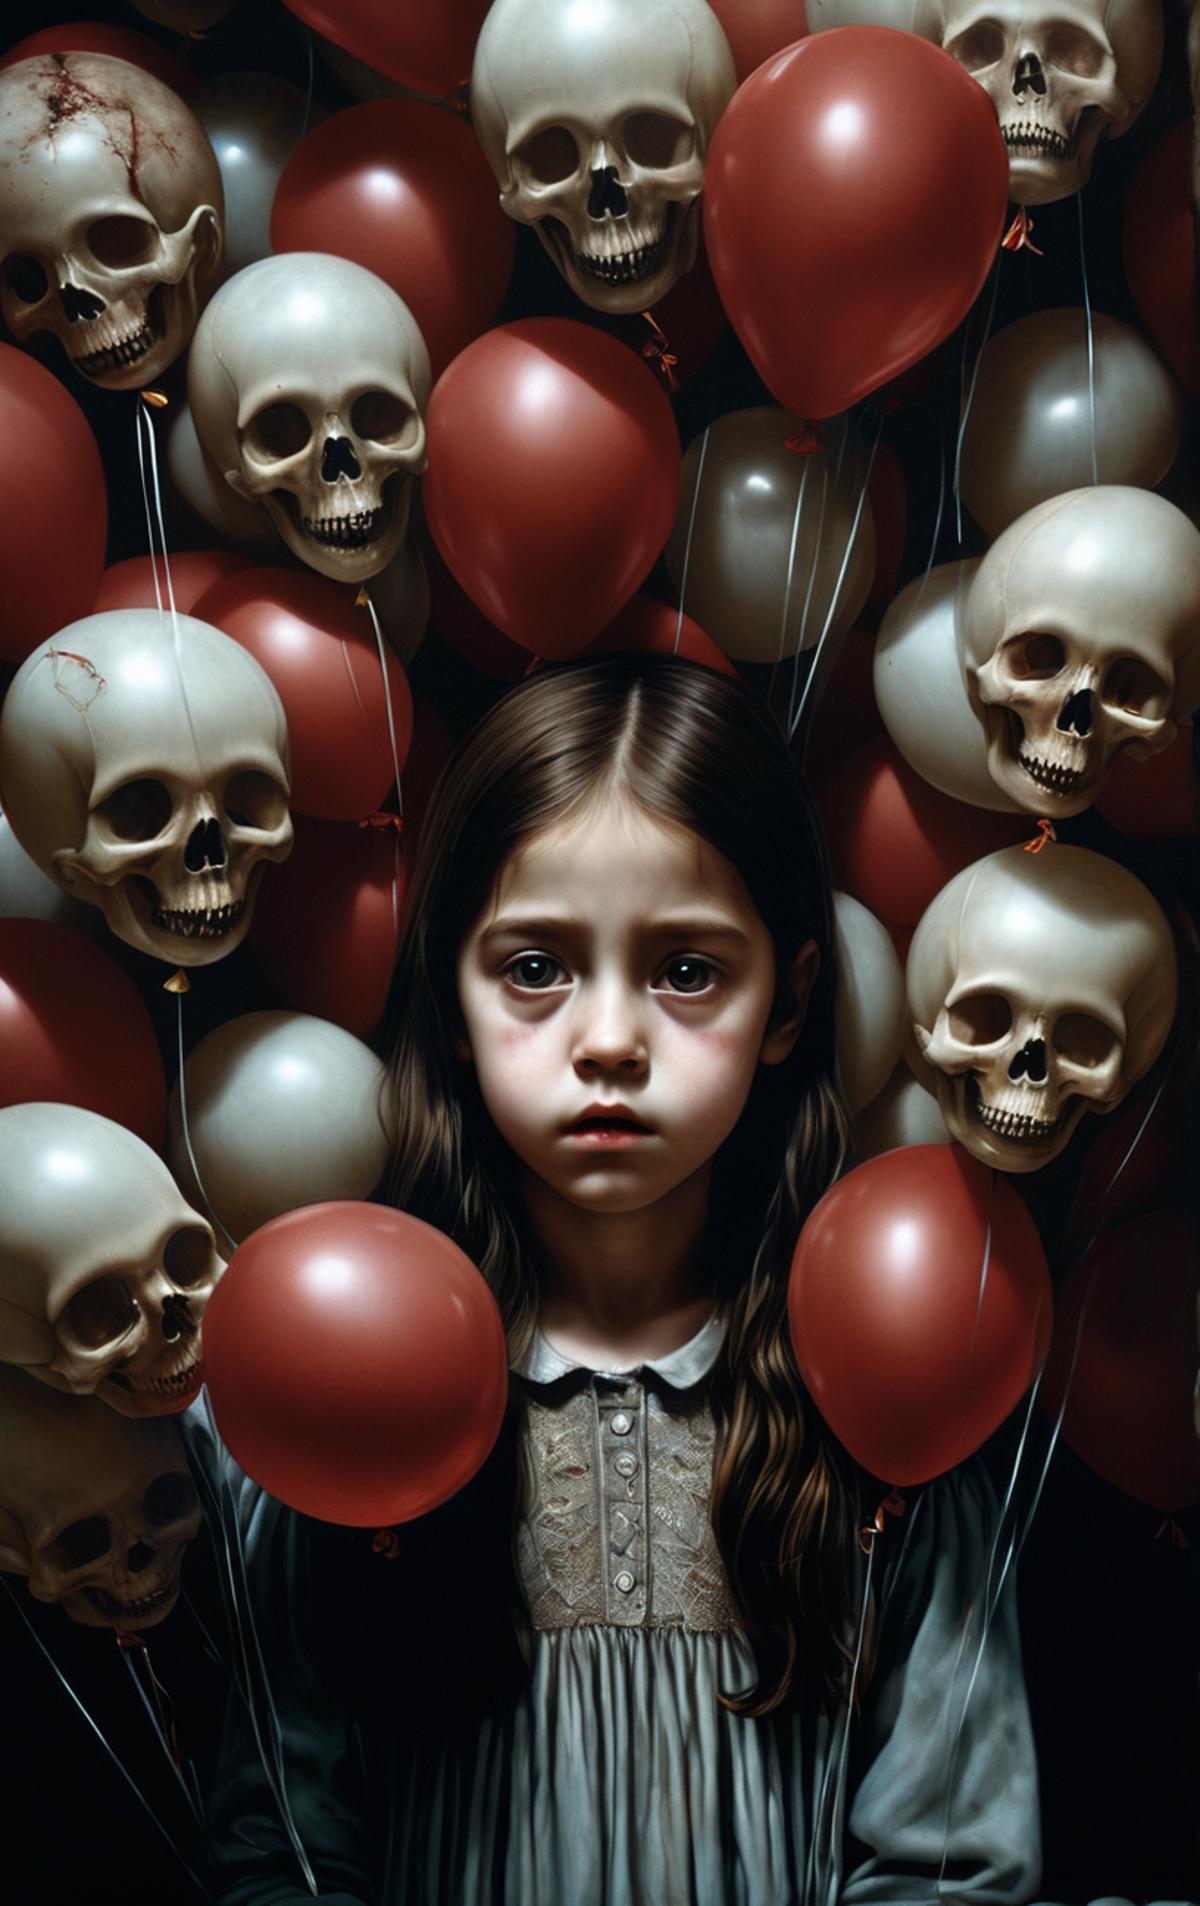 A young girl surrounded by balloons and skulls.